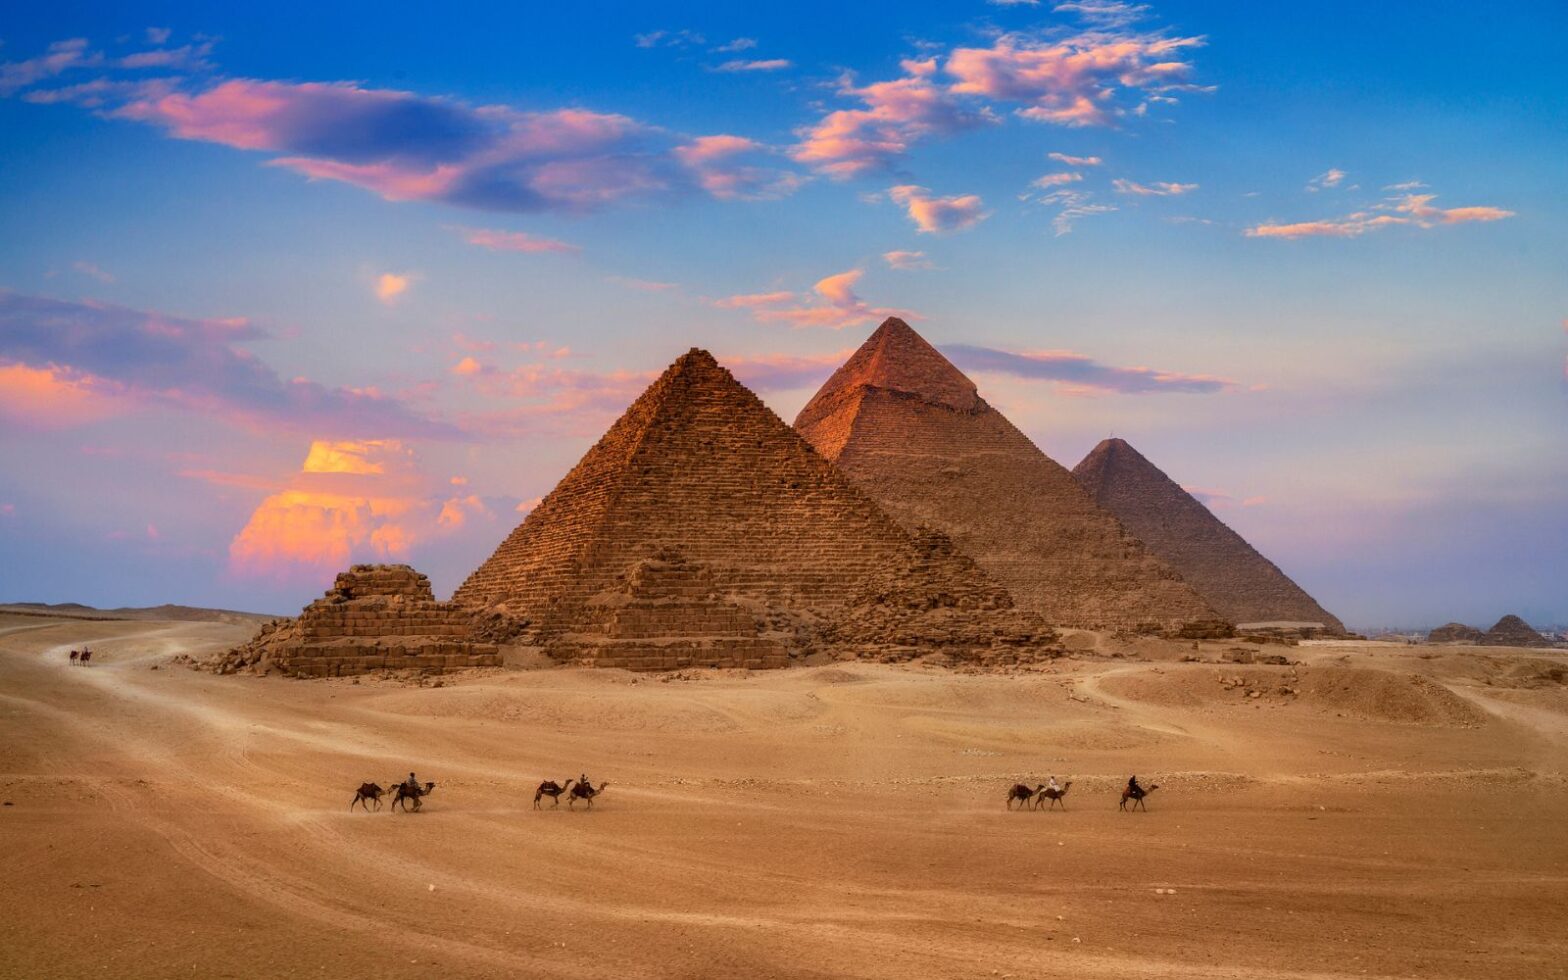 Giza Egypt Pyramids in Sunset Scene - Menkaure pyramid to soon reopen